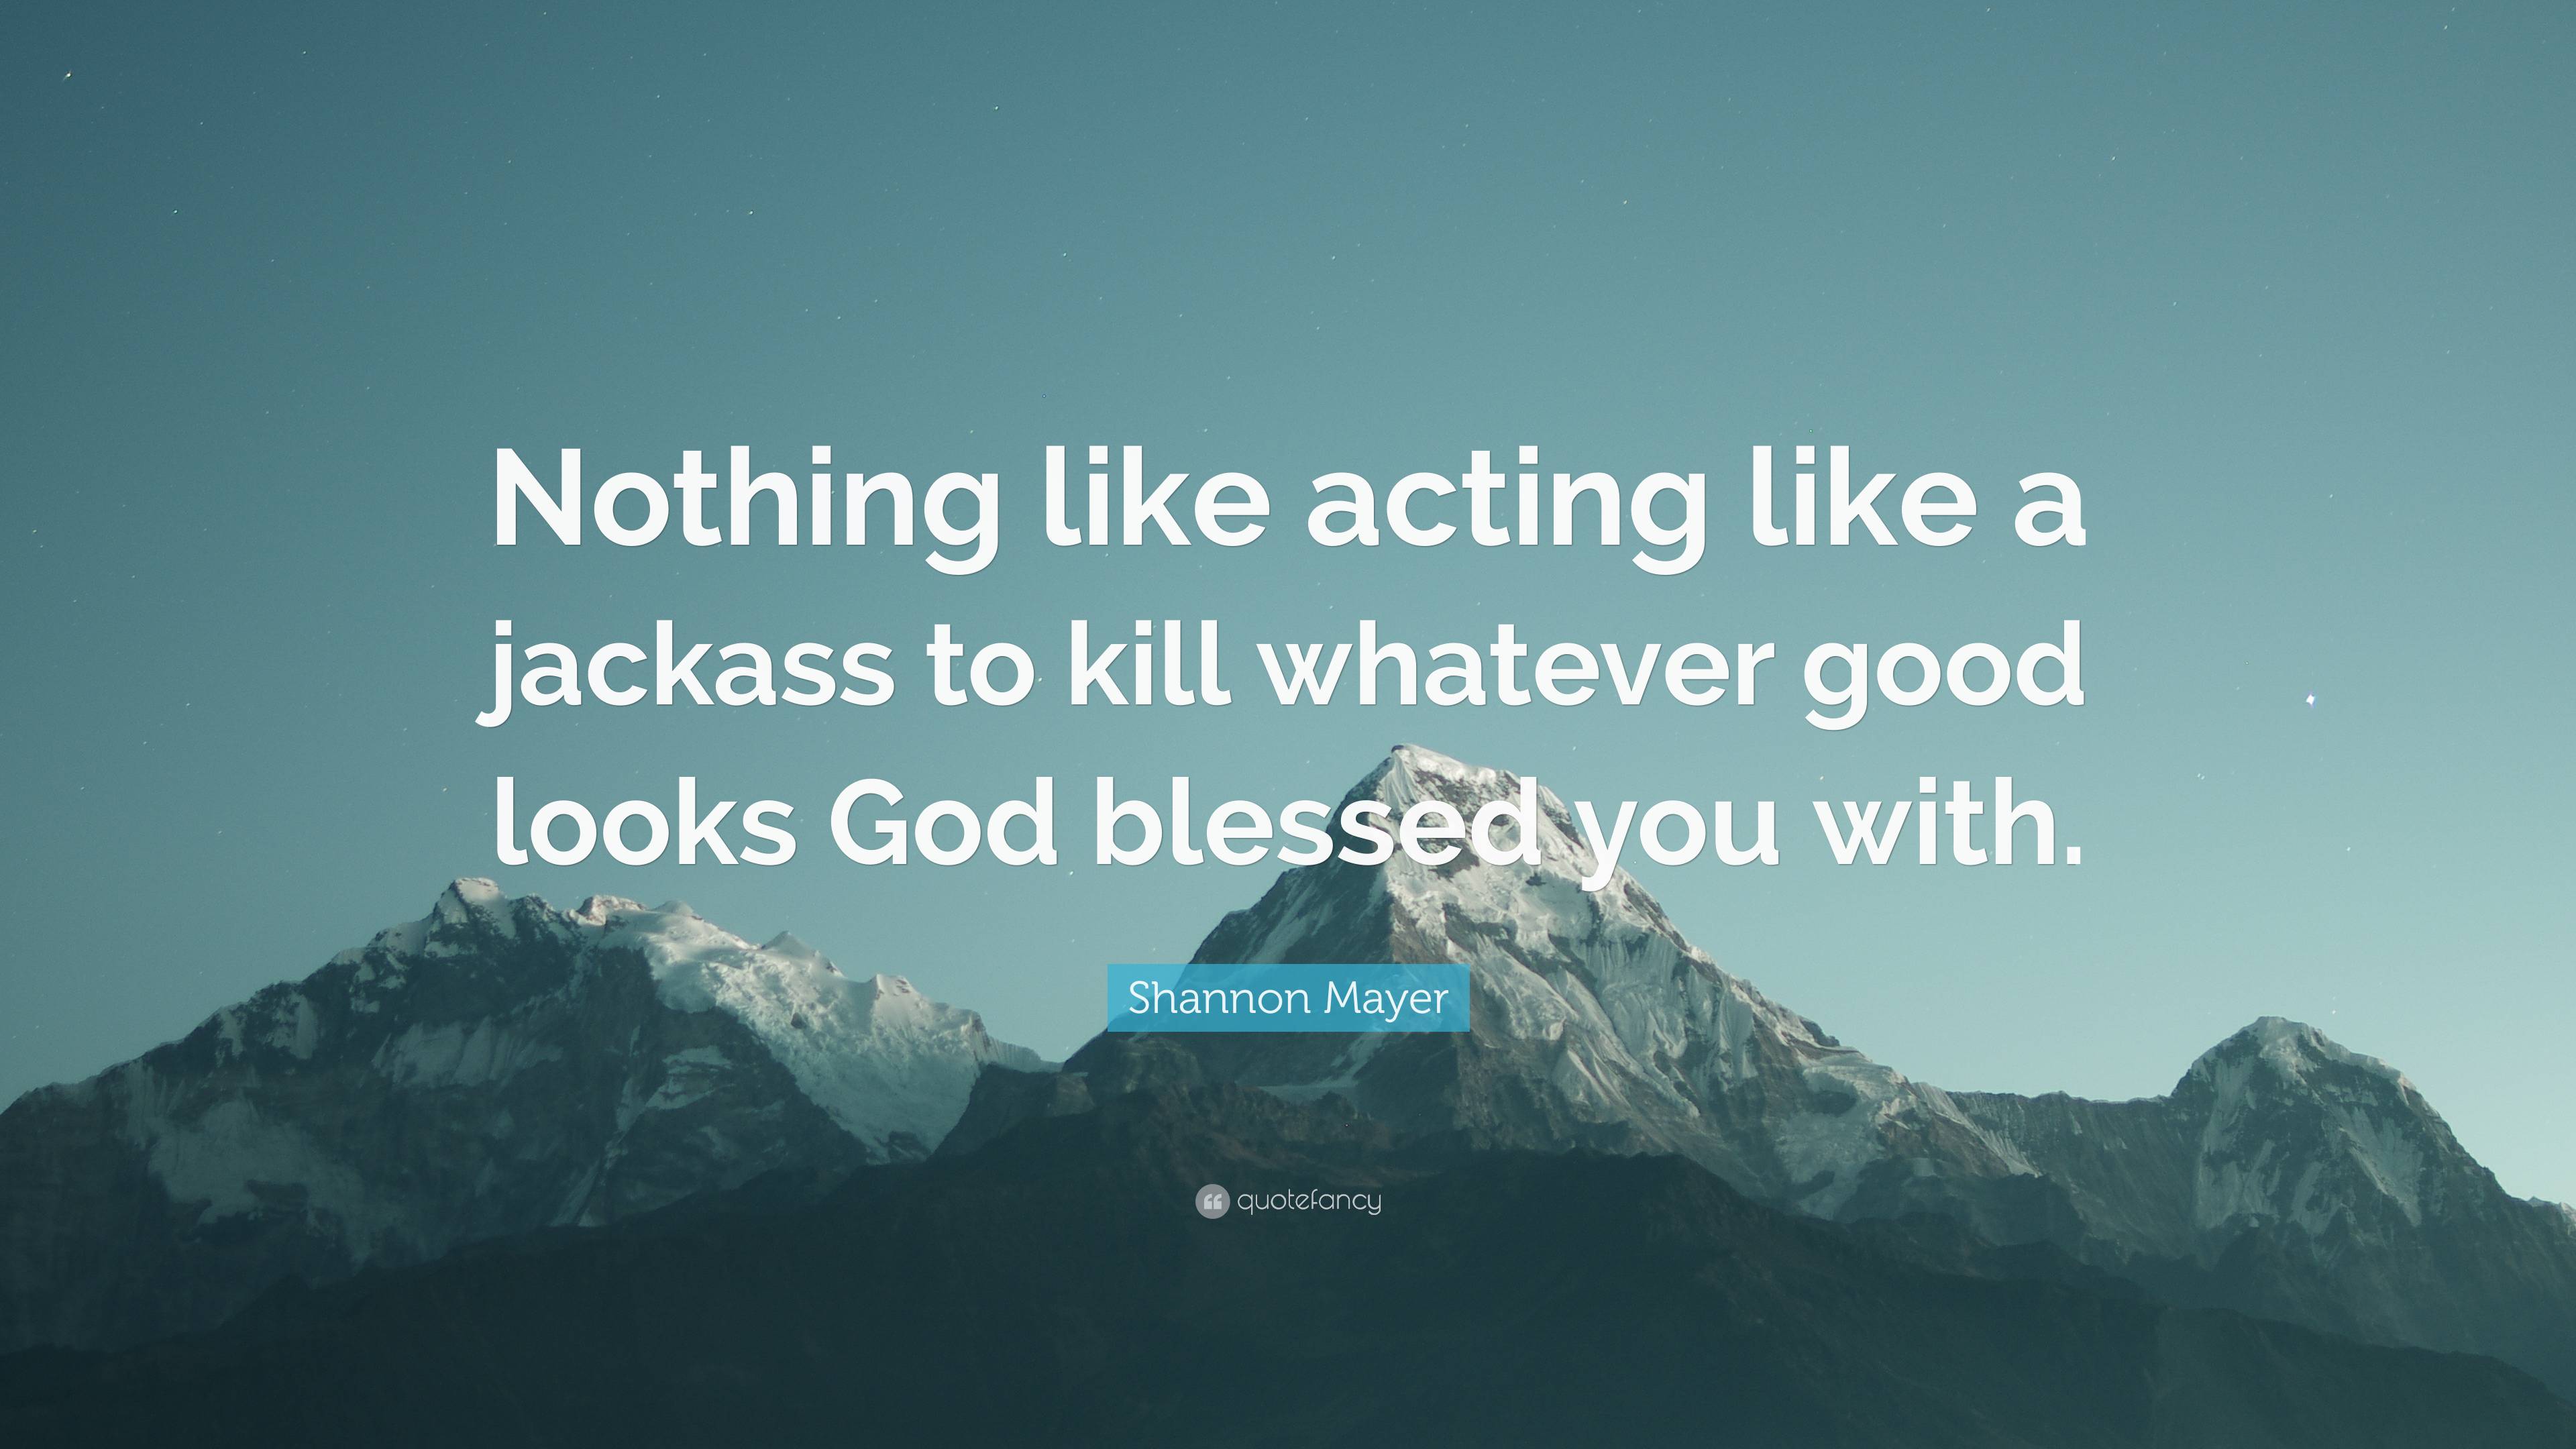 Shannon Mayer Quote: “Nothing like acting like a jackass to kill whatever good  looks God blessed